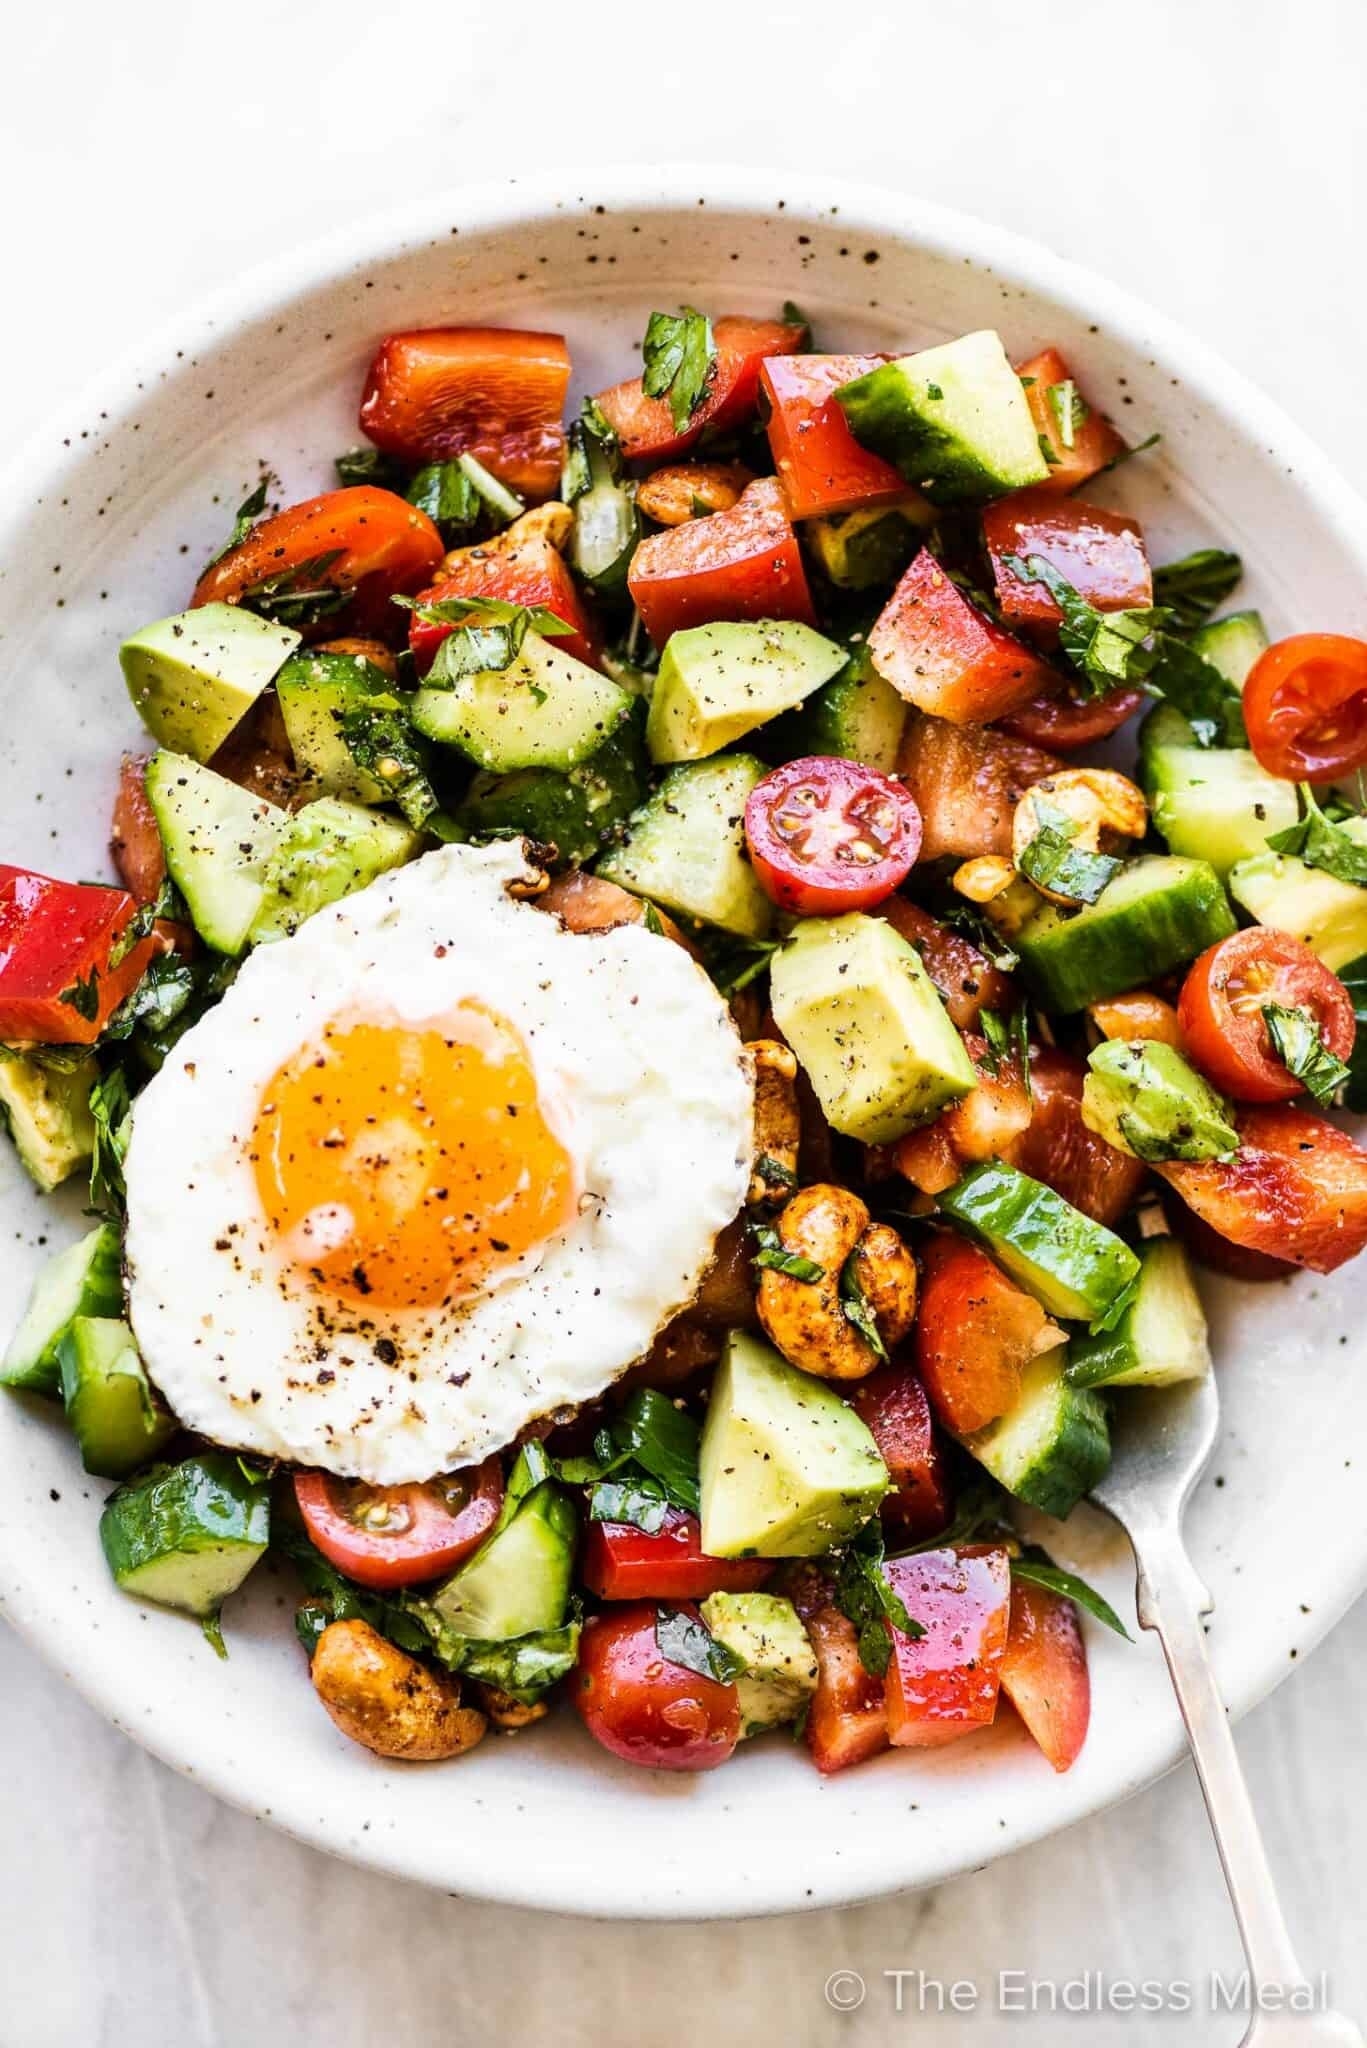 A bowl of salad with tomatoes, cucumbers, avocado, and a fried egg on top, with a fork on the side